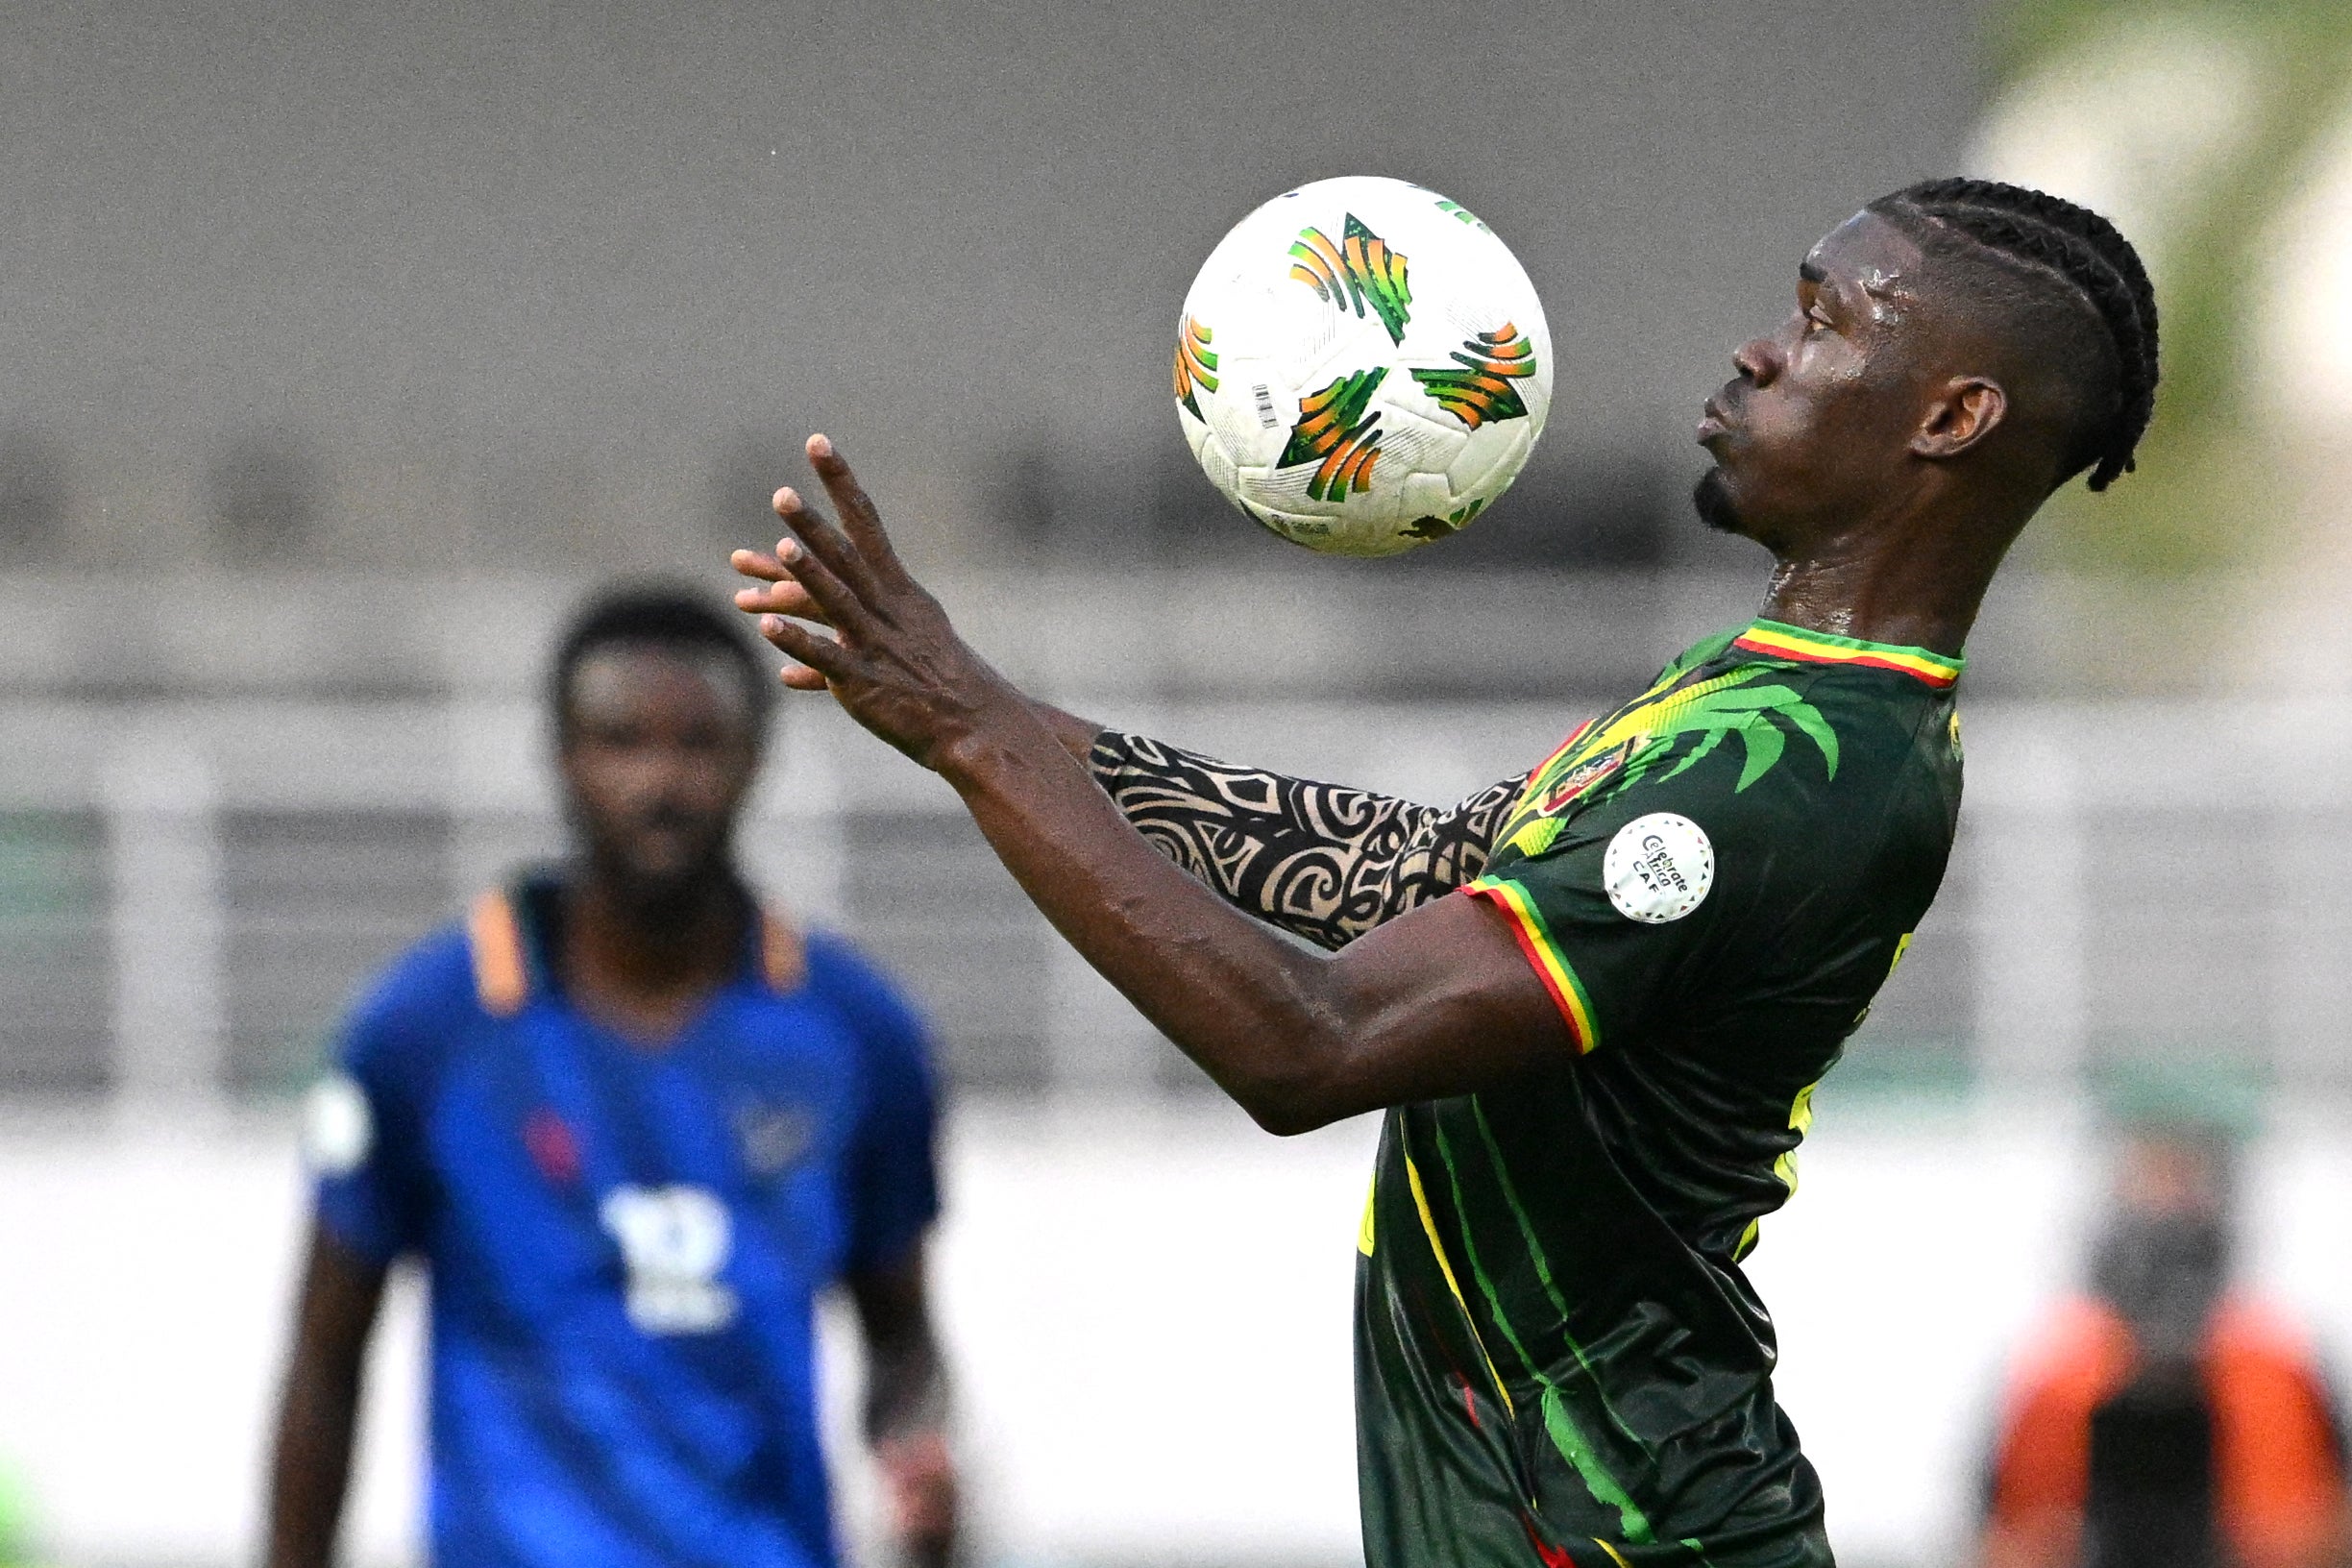 Yves Bissouma in action for Mali against Namibia during the Africa Cup of Nations